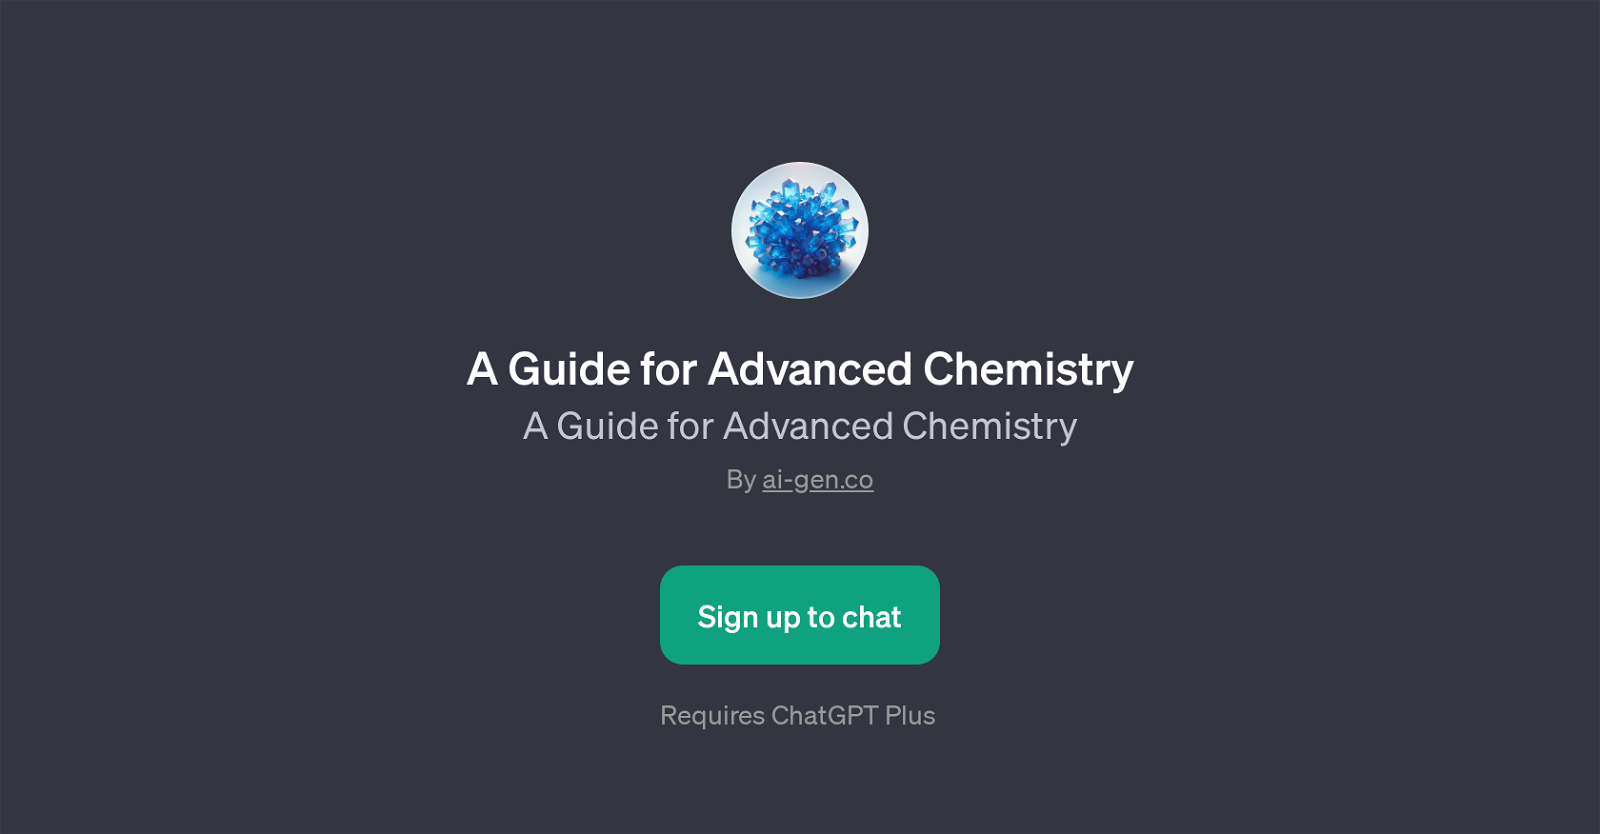 A Guide for Advanced Chemistry website